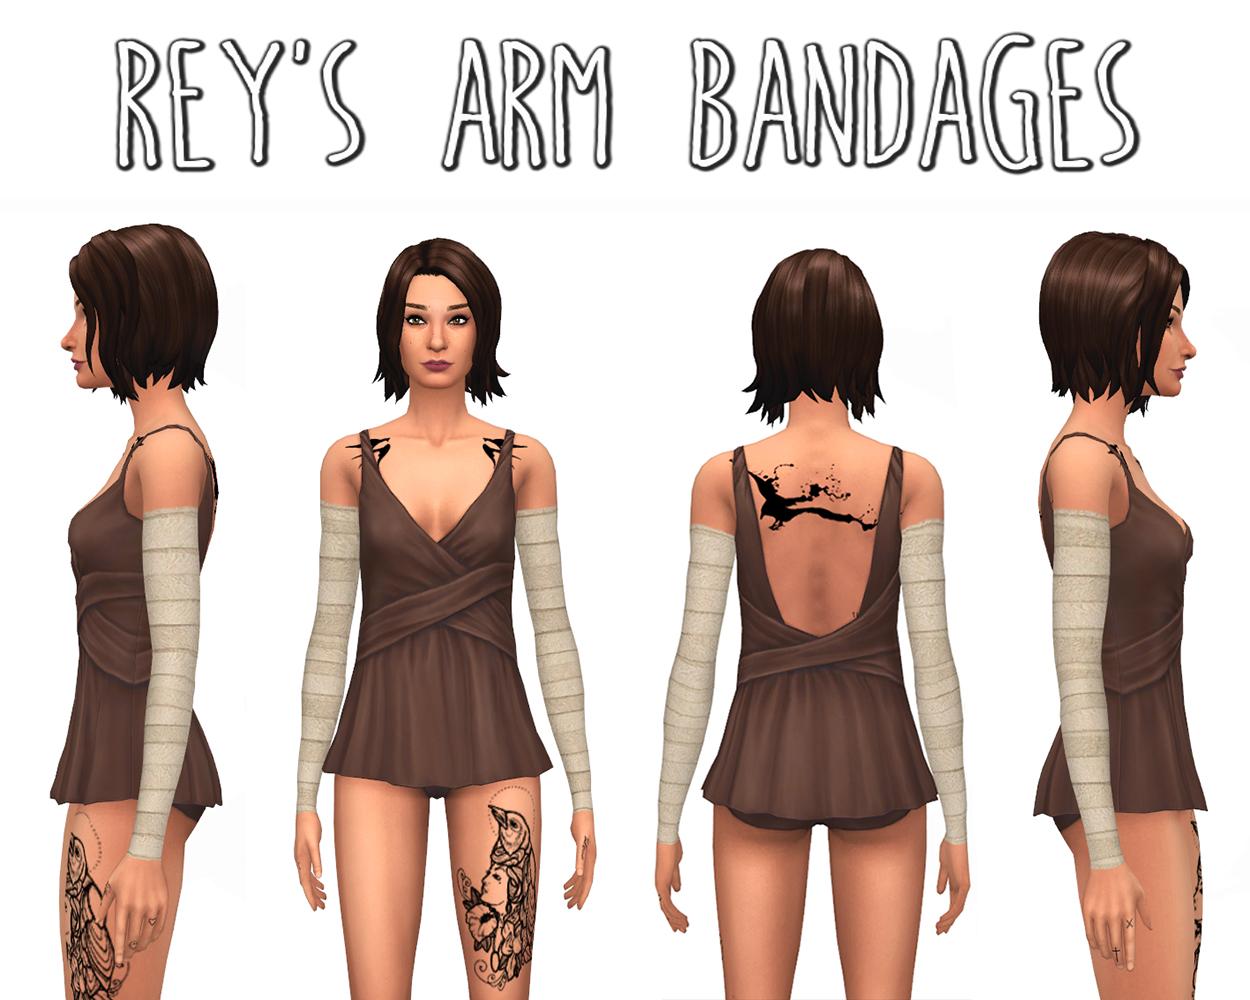 Rey's Arm Bandages (from Star Wars: The Force Awakens)